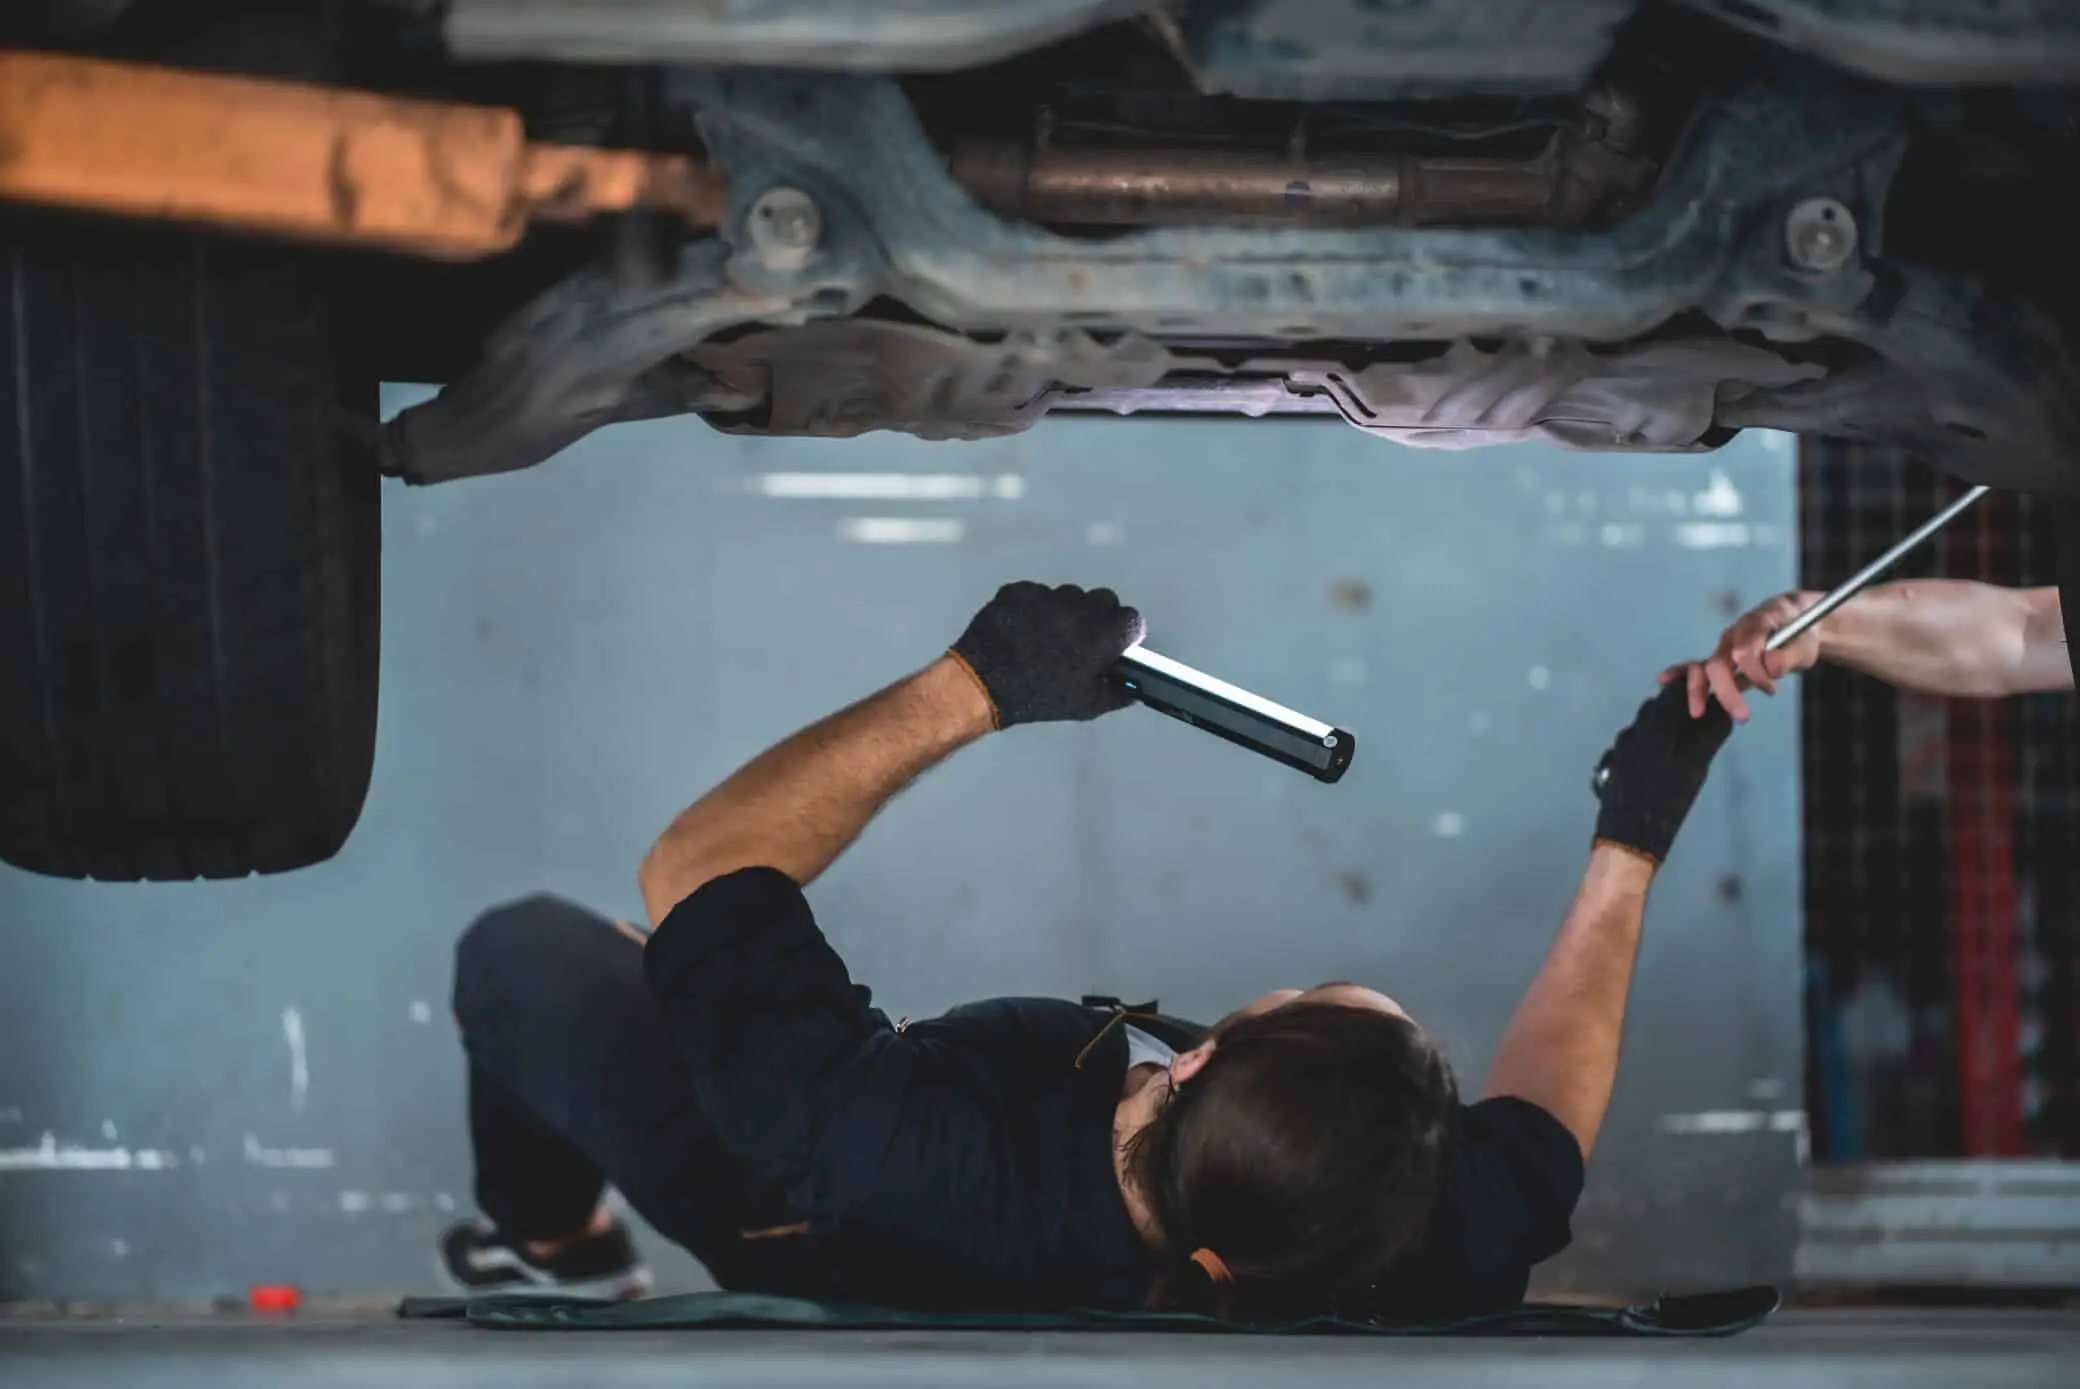 Auto Mechanic Garage Car Service, Repair And Maintenance Vehicle Automobile, Technician Man Person Workshop For Automotive Engine And Working With Motor Tool